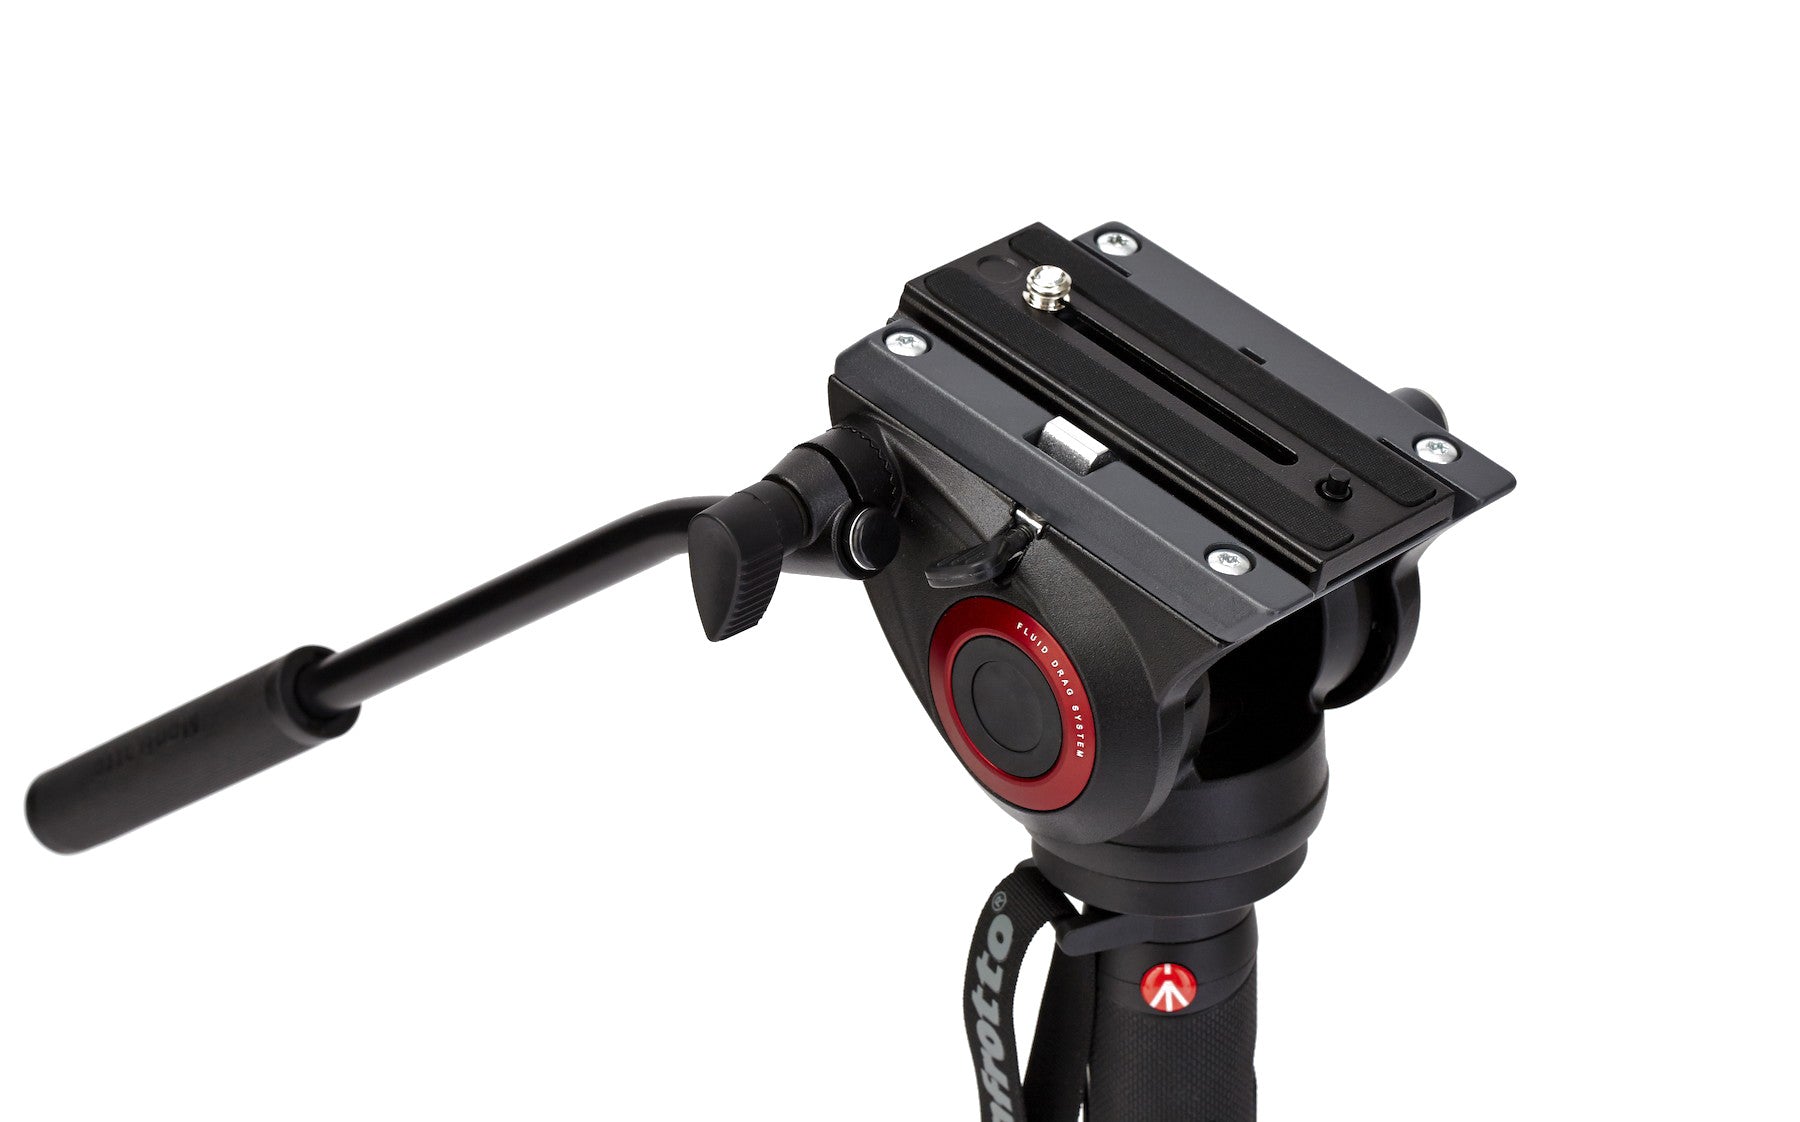 Manfrotto Video MVMXPRO500US Xpro Aluminum Video Monopod with 500 Series Video Head, tripods video monopods, Manfrotto - Pictureline  - 5